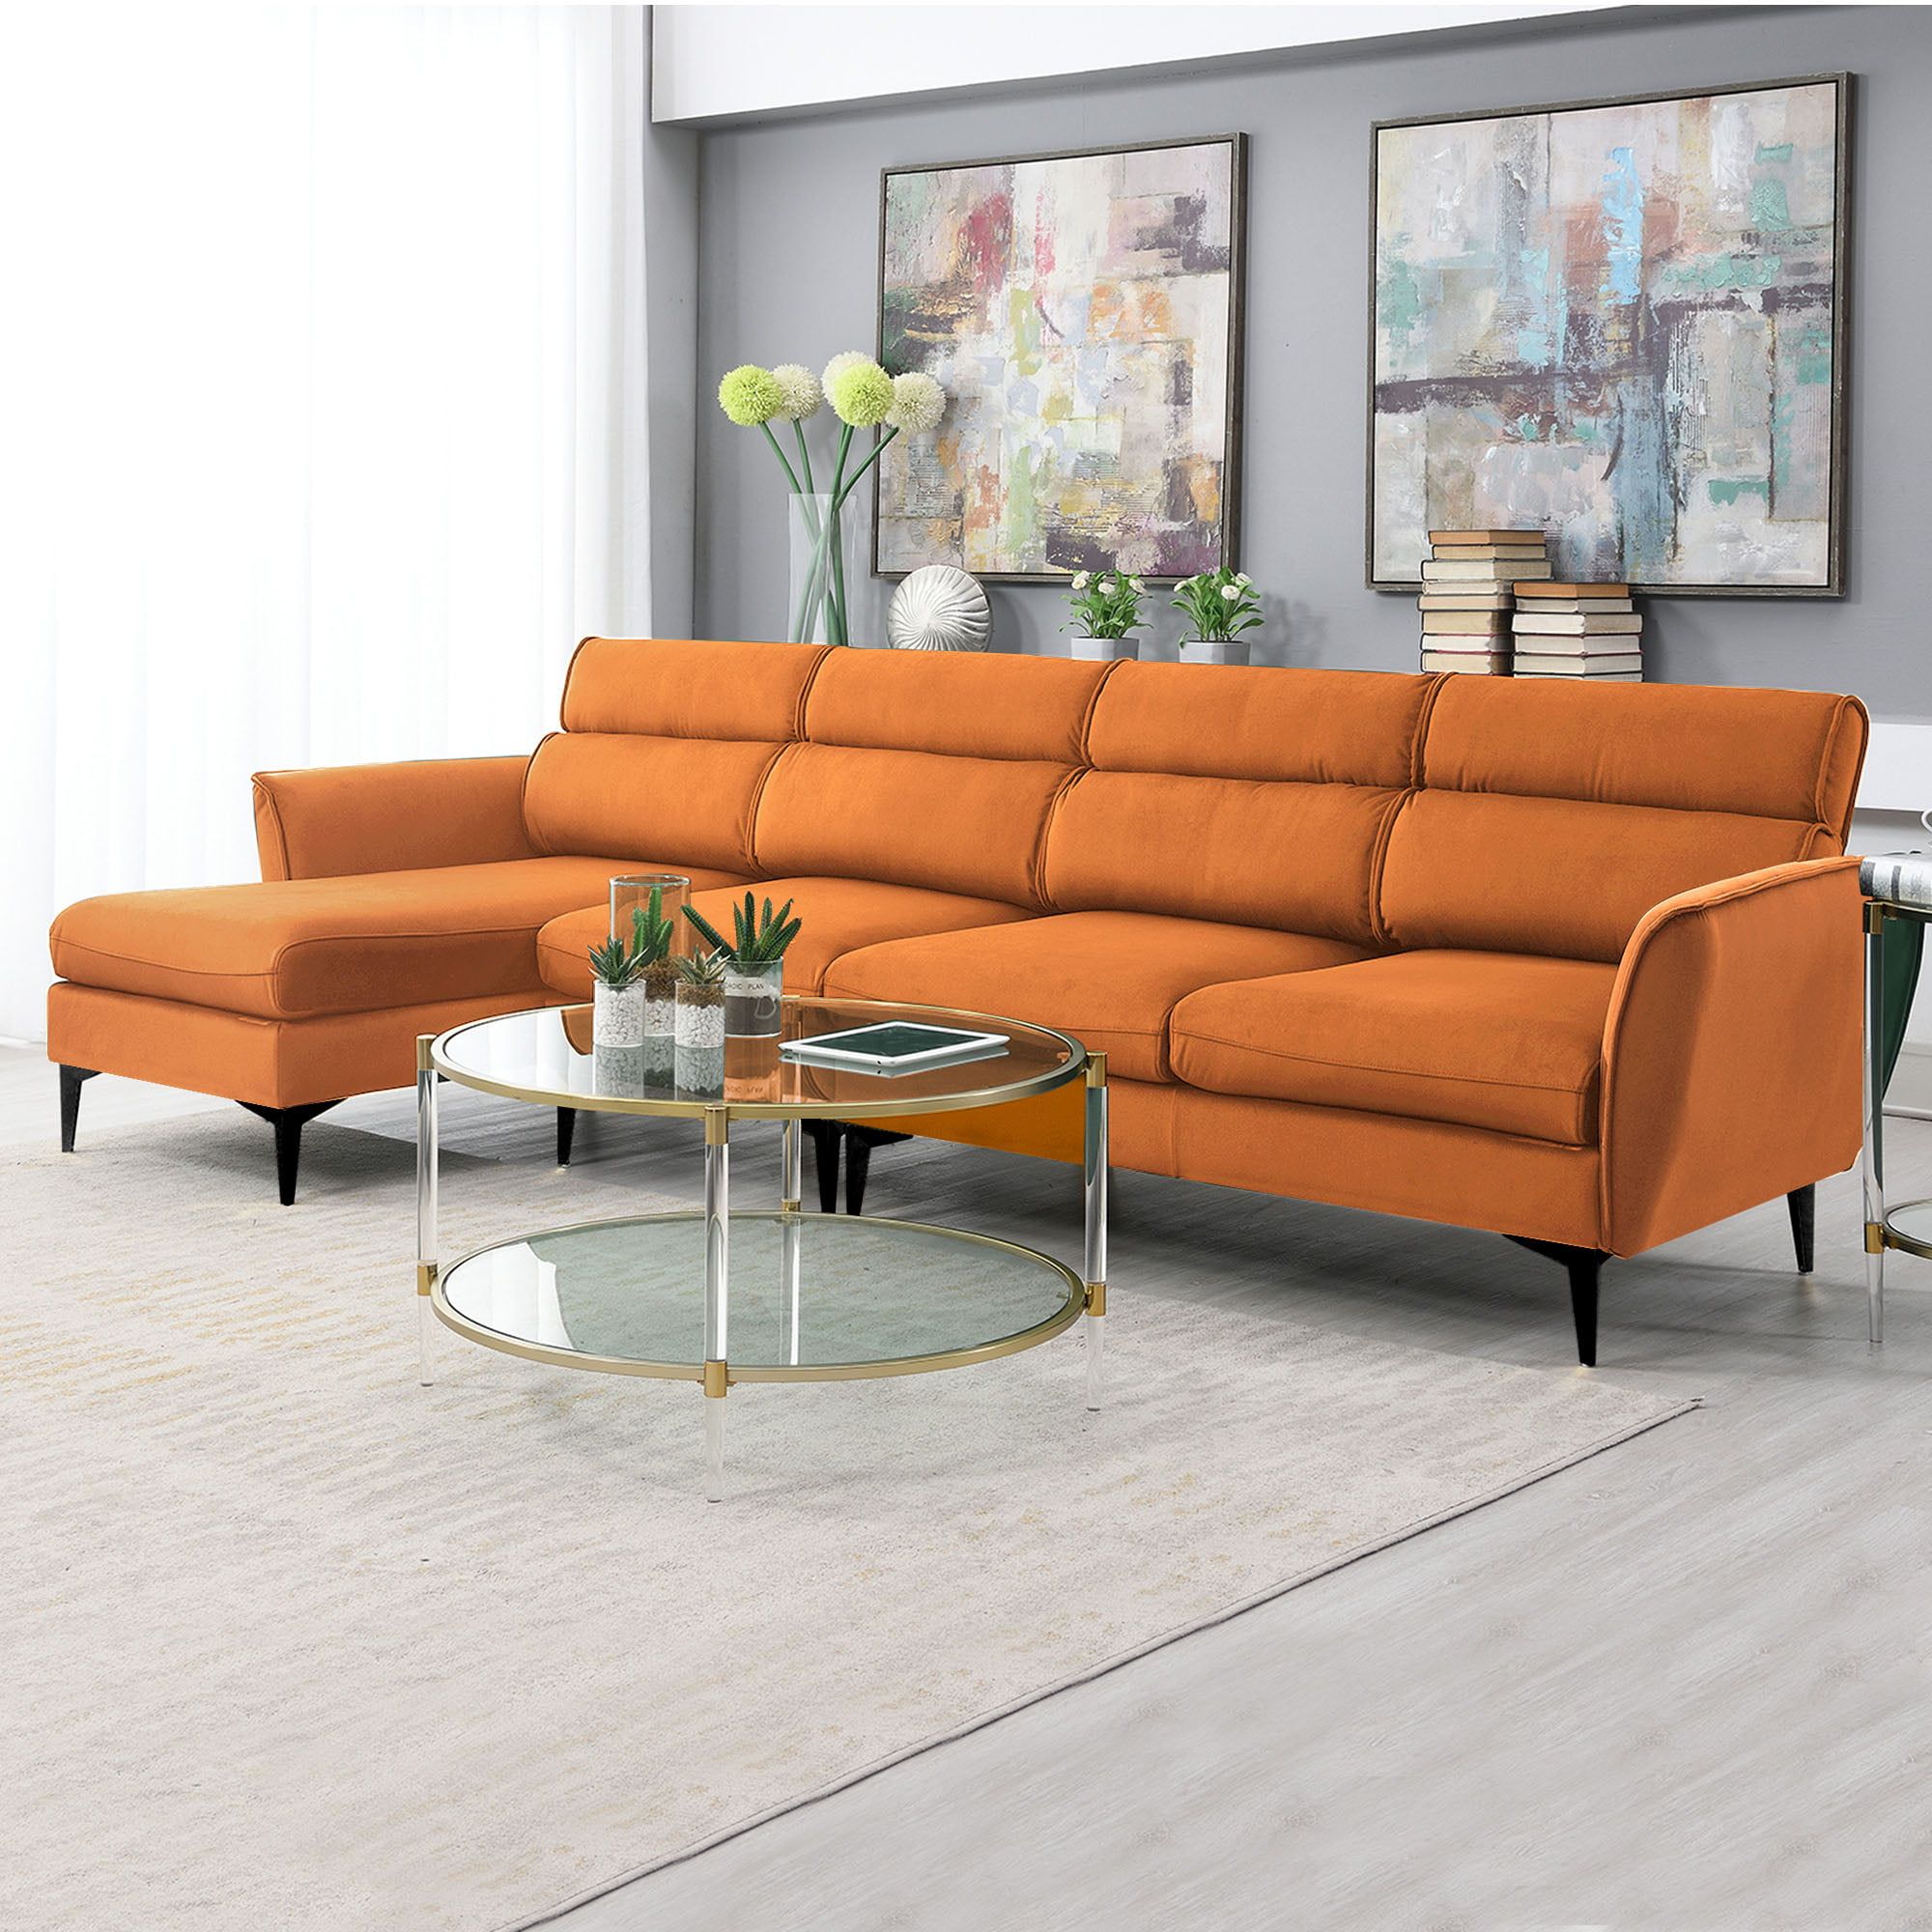 111"L Convertible Sectional Sofa Couch, Flannel L Shaped Couch With  Left/Right Chaise, Modern Heavy Duty 4 Seater Sectional Couch, Kamida Sectional  Couch Furniture For Living Room, Orange – Walmart For Heavy Duty Sectional Couches (View 3 of 15)